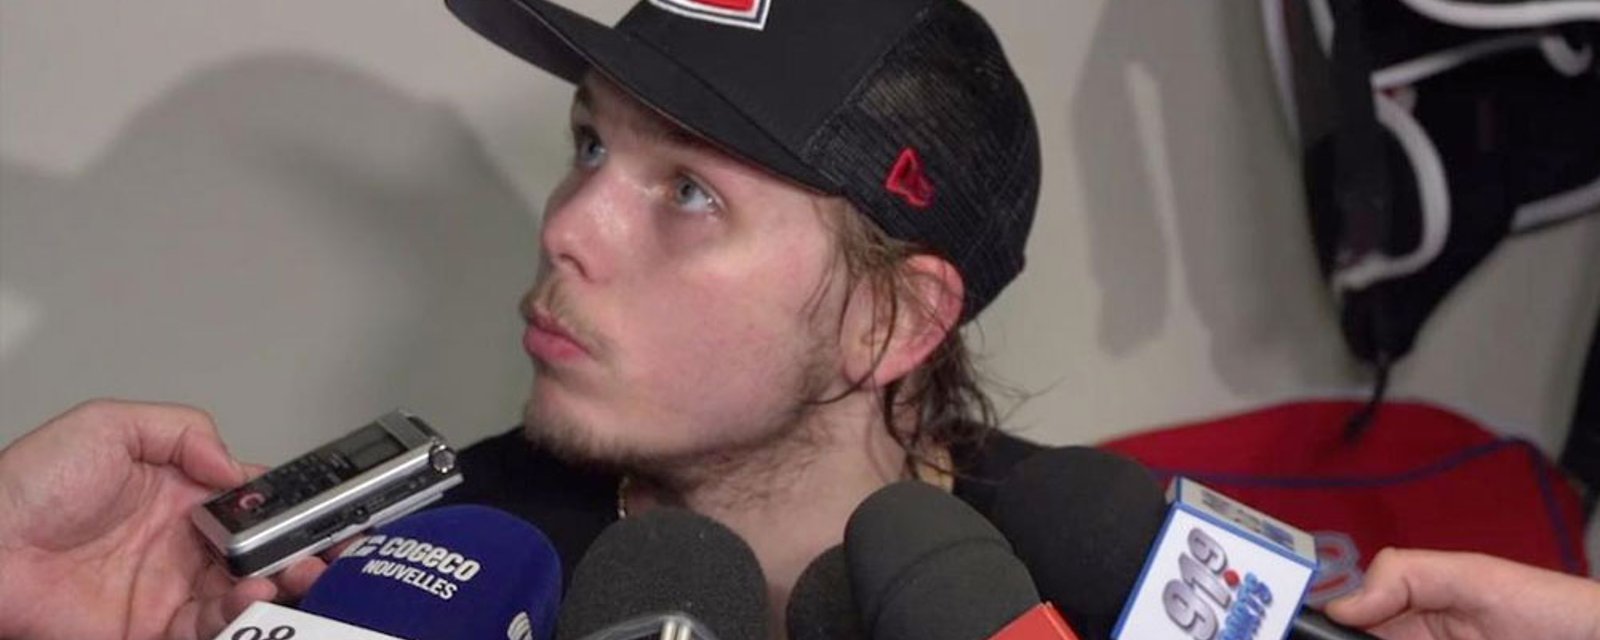 Russian player says he was victim of racism and anti-Russian targeting by two NHL teams